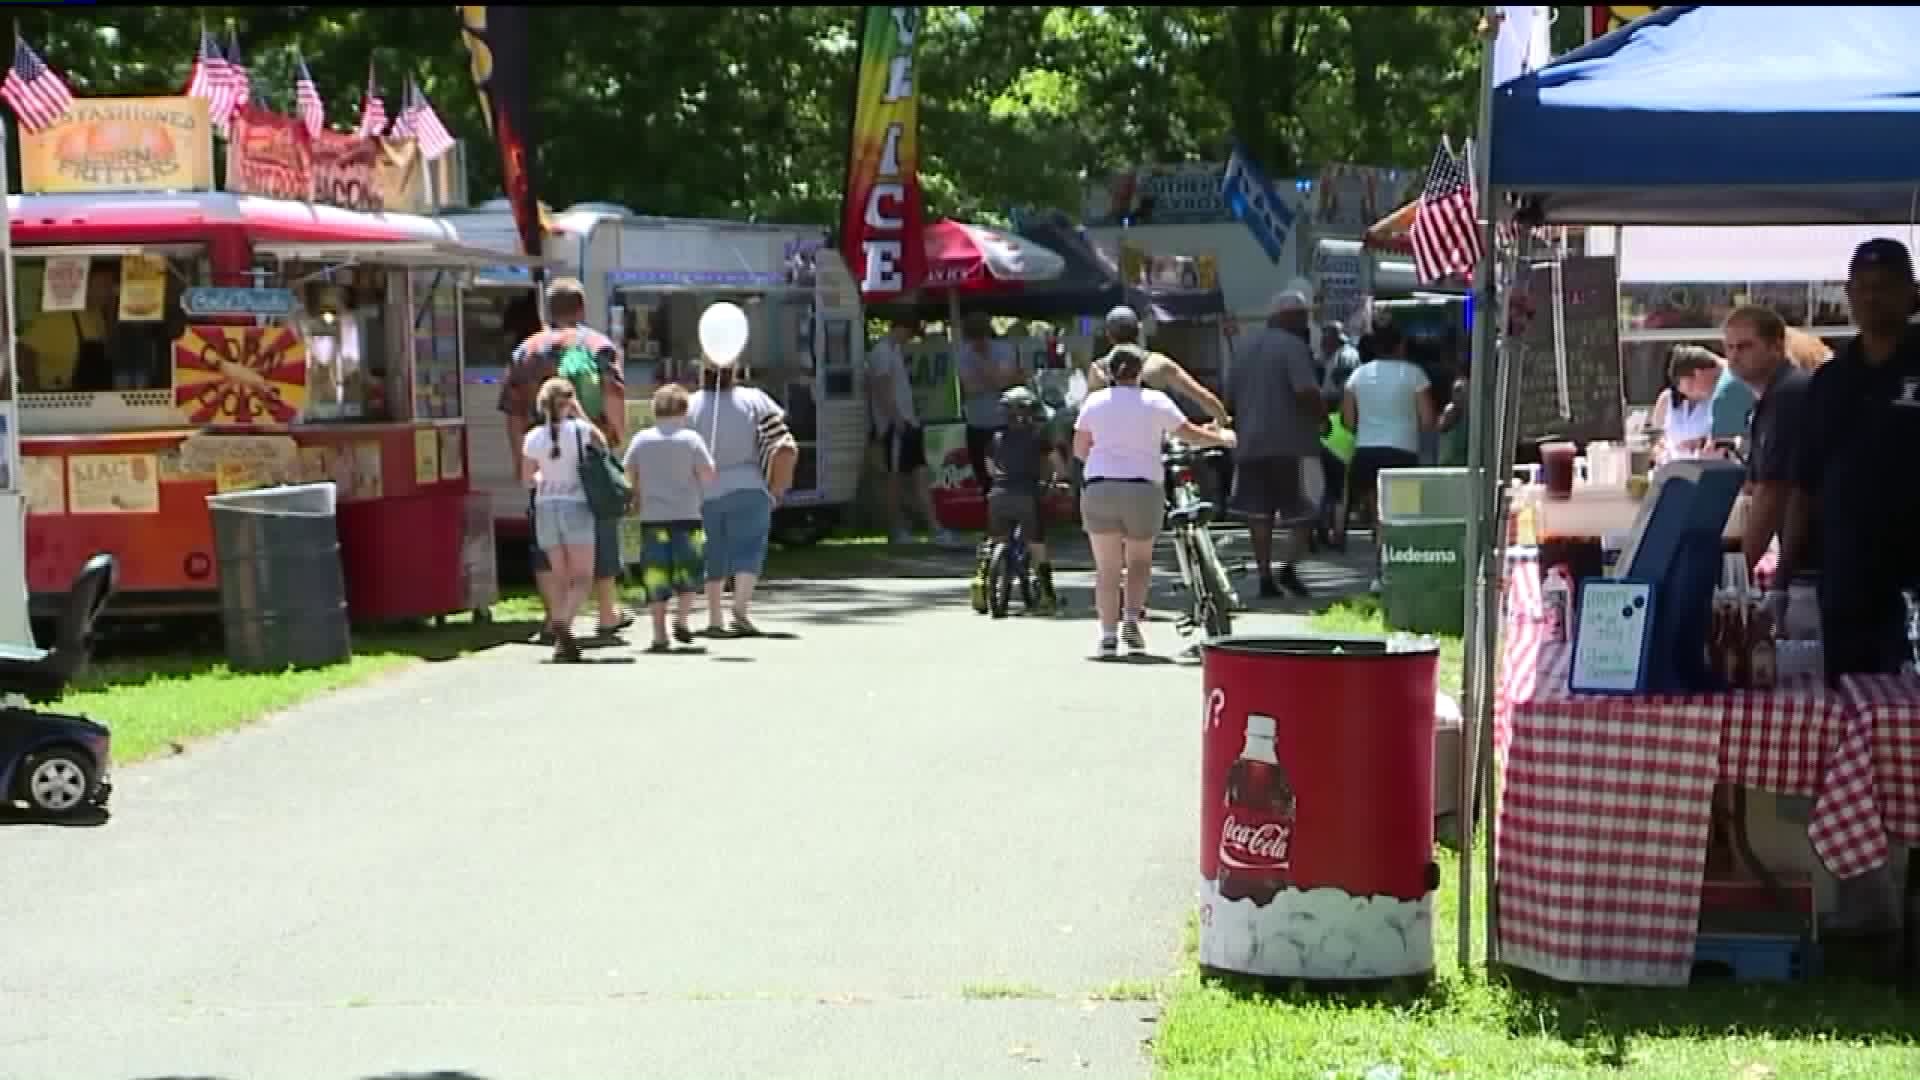 Old-Fashioned Fourth of July Celebration Kicks off in Wilkes-Barre